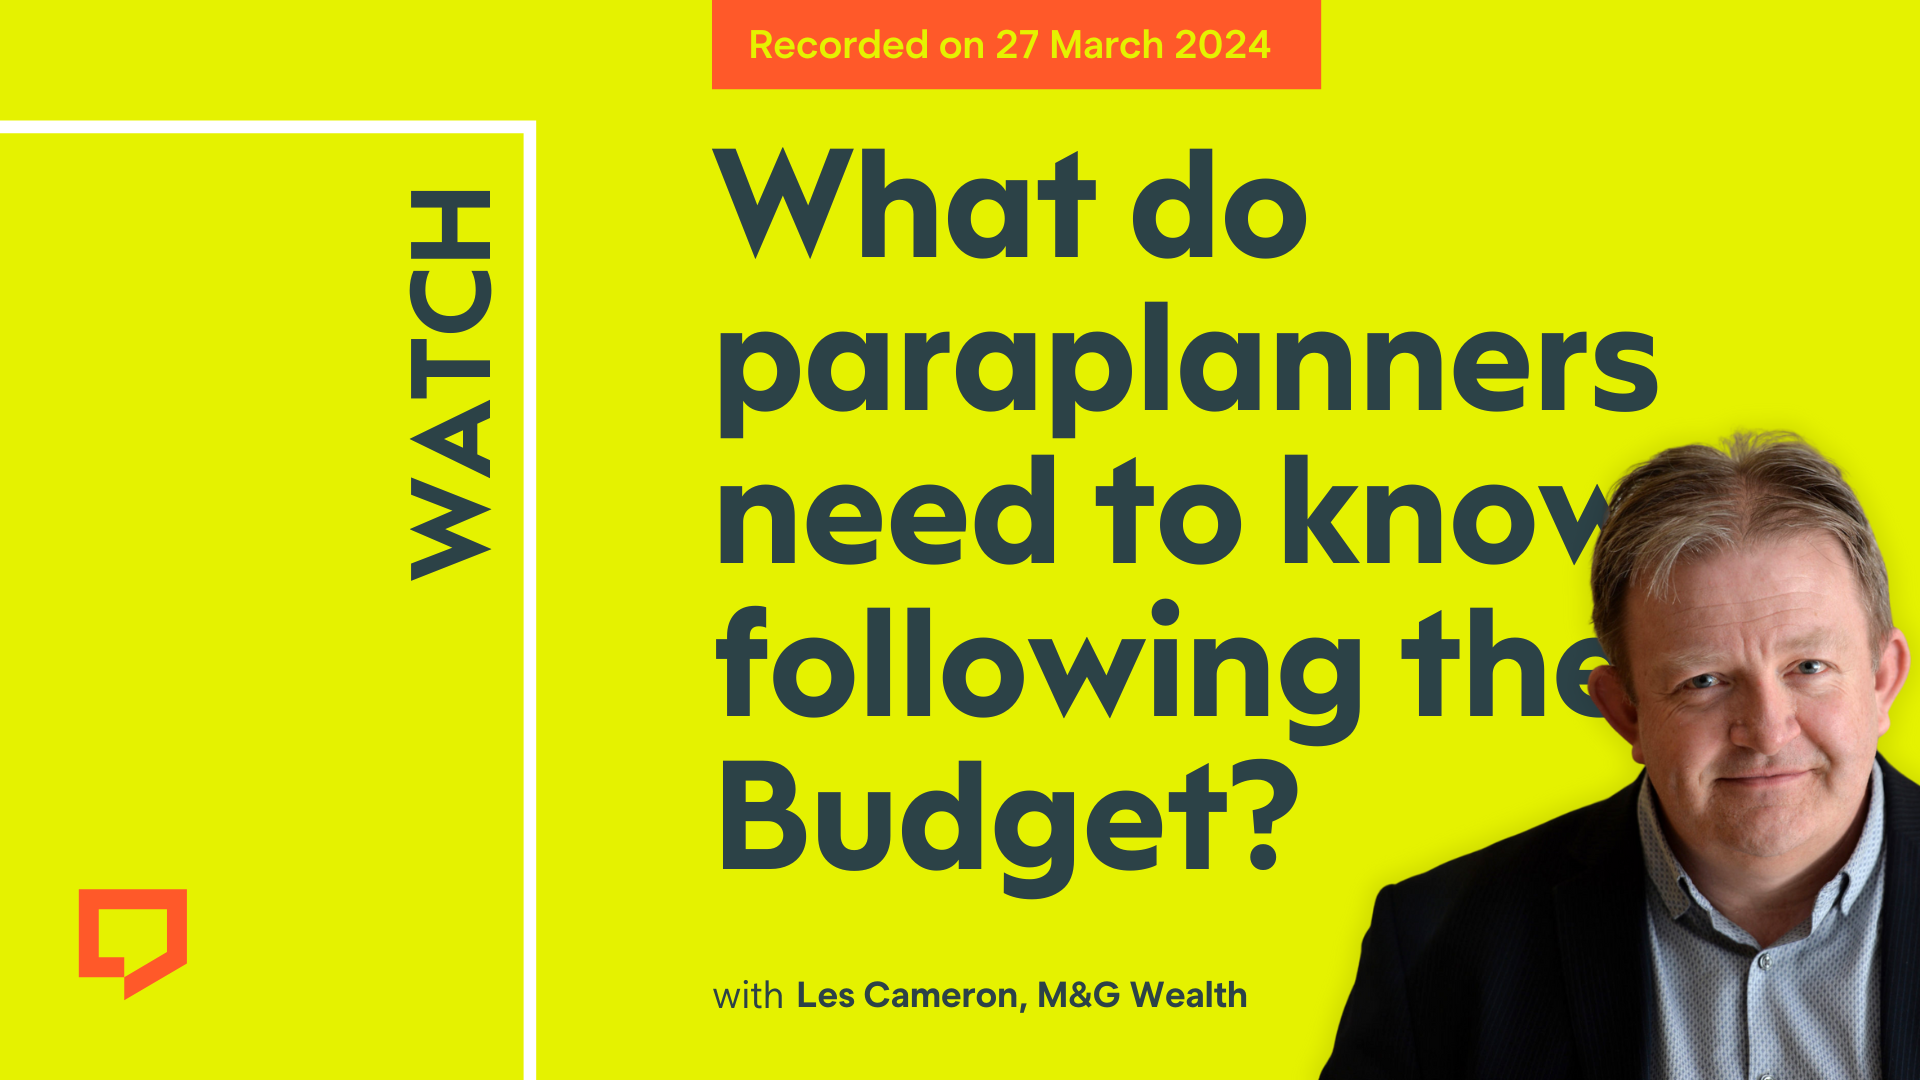 Recorded on 27 March 2024. What do paraplanners need to know following the Budget? With Les Cameron of M&G Wealth